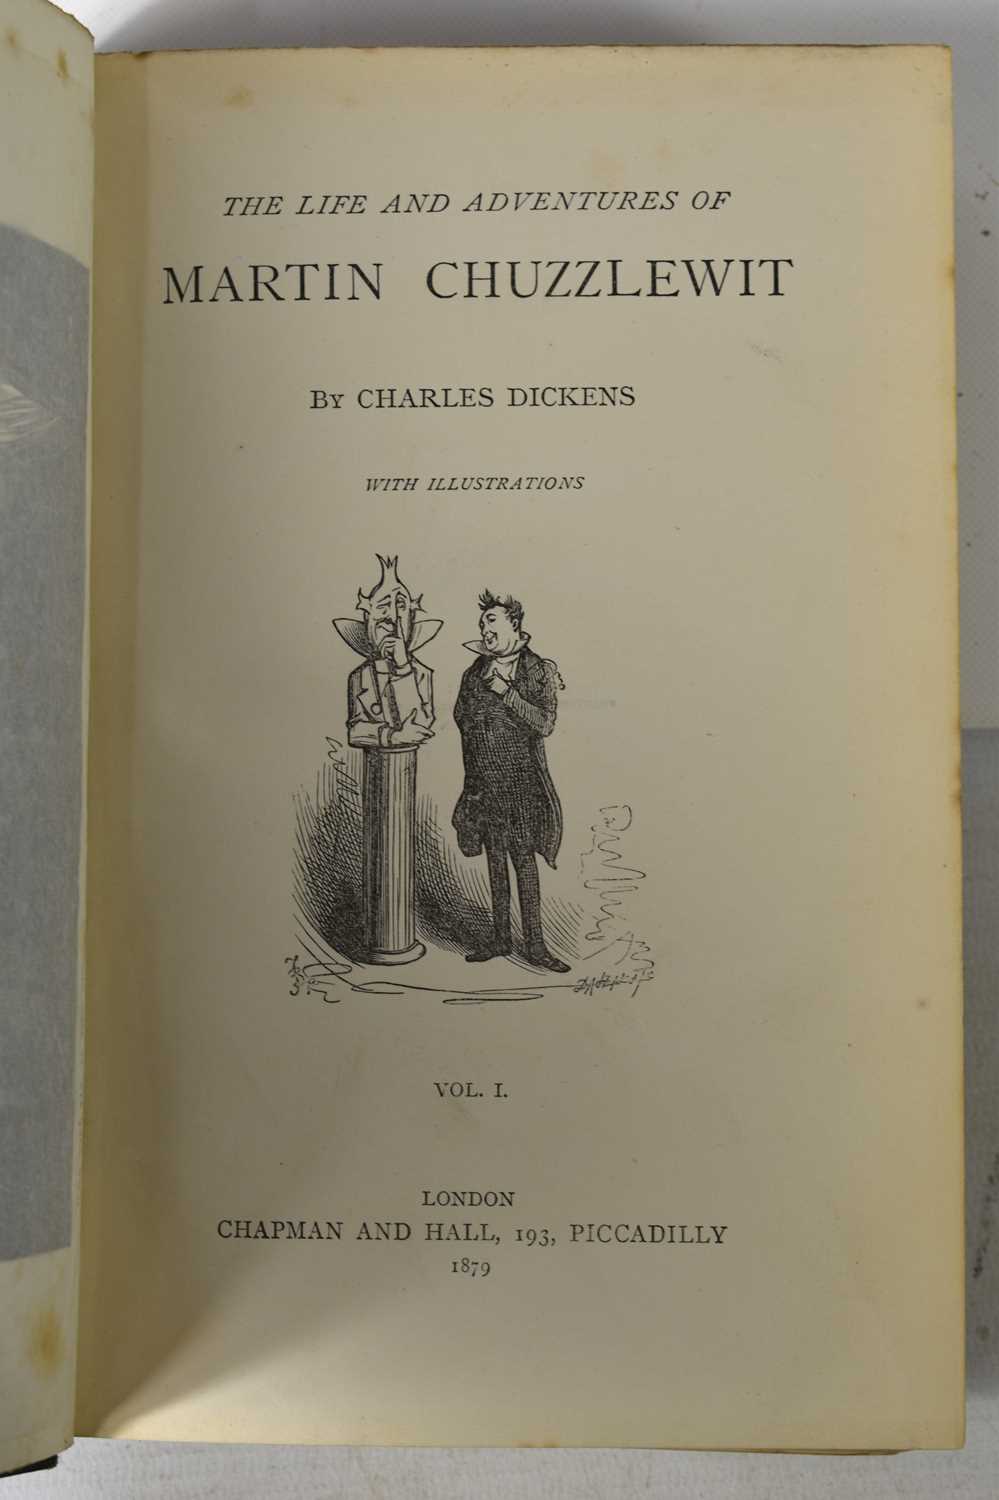 Charles Dickens, The Complete Works in 30 volumes, published by Chapman and Hall, 19th century, with - Image 2 of 2